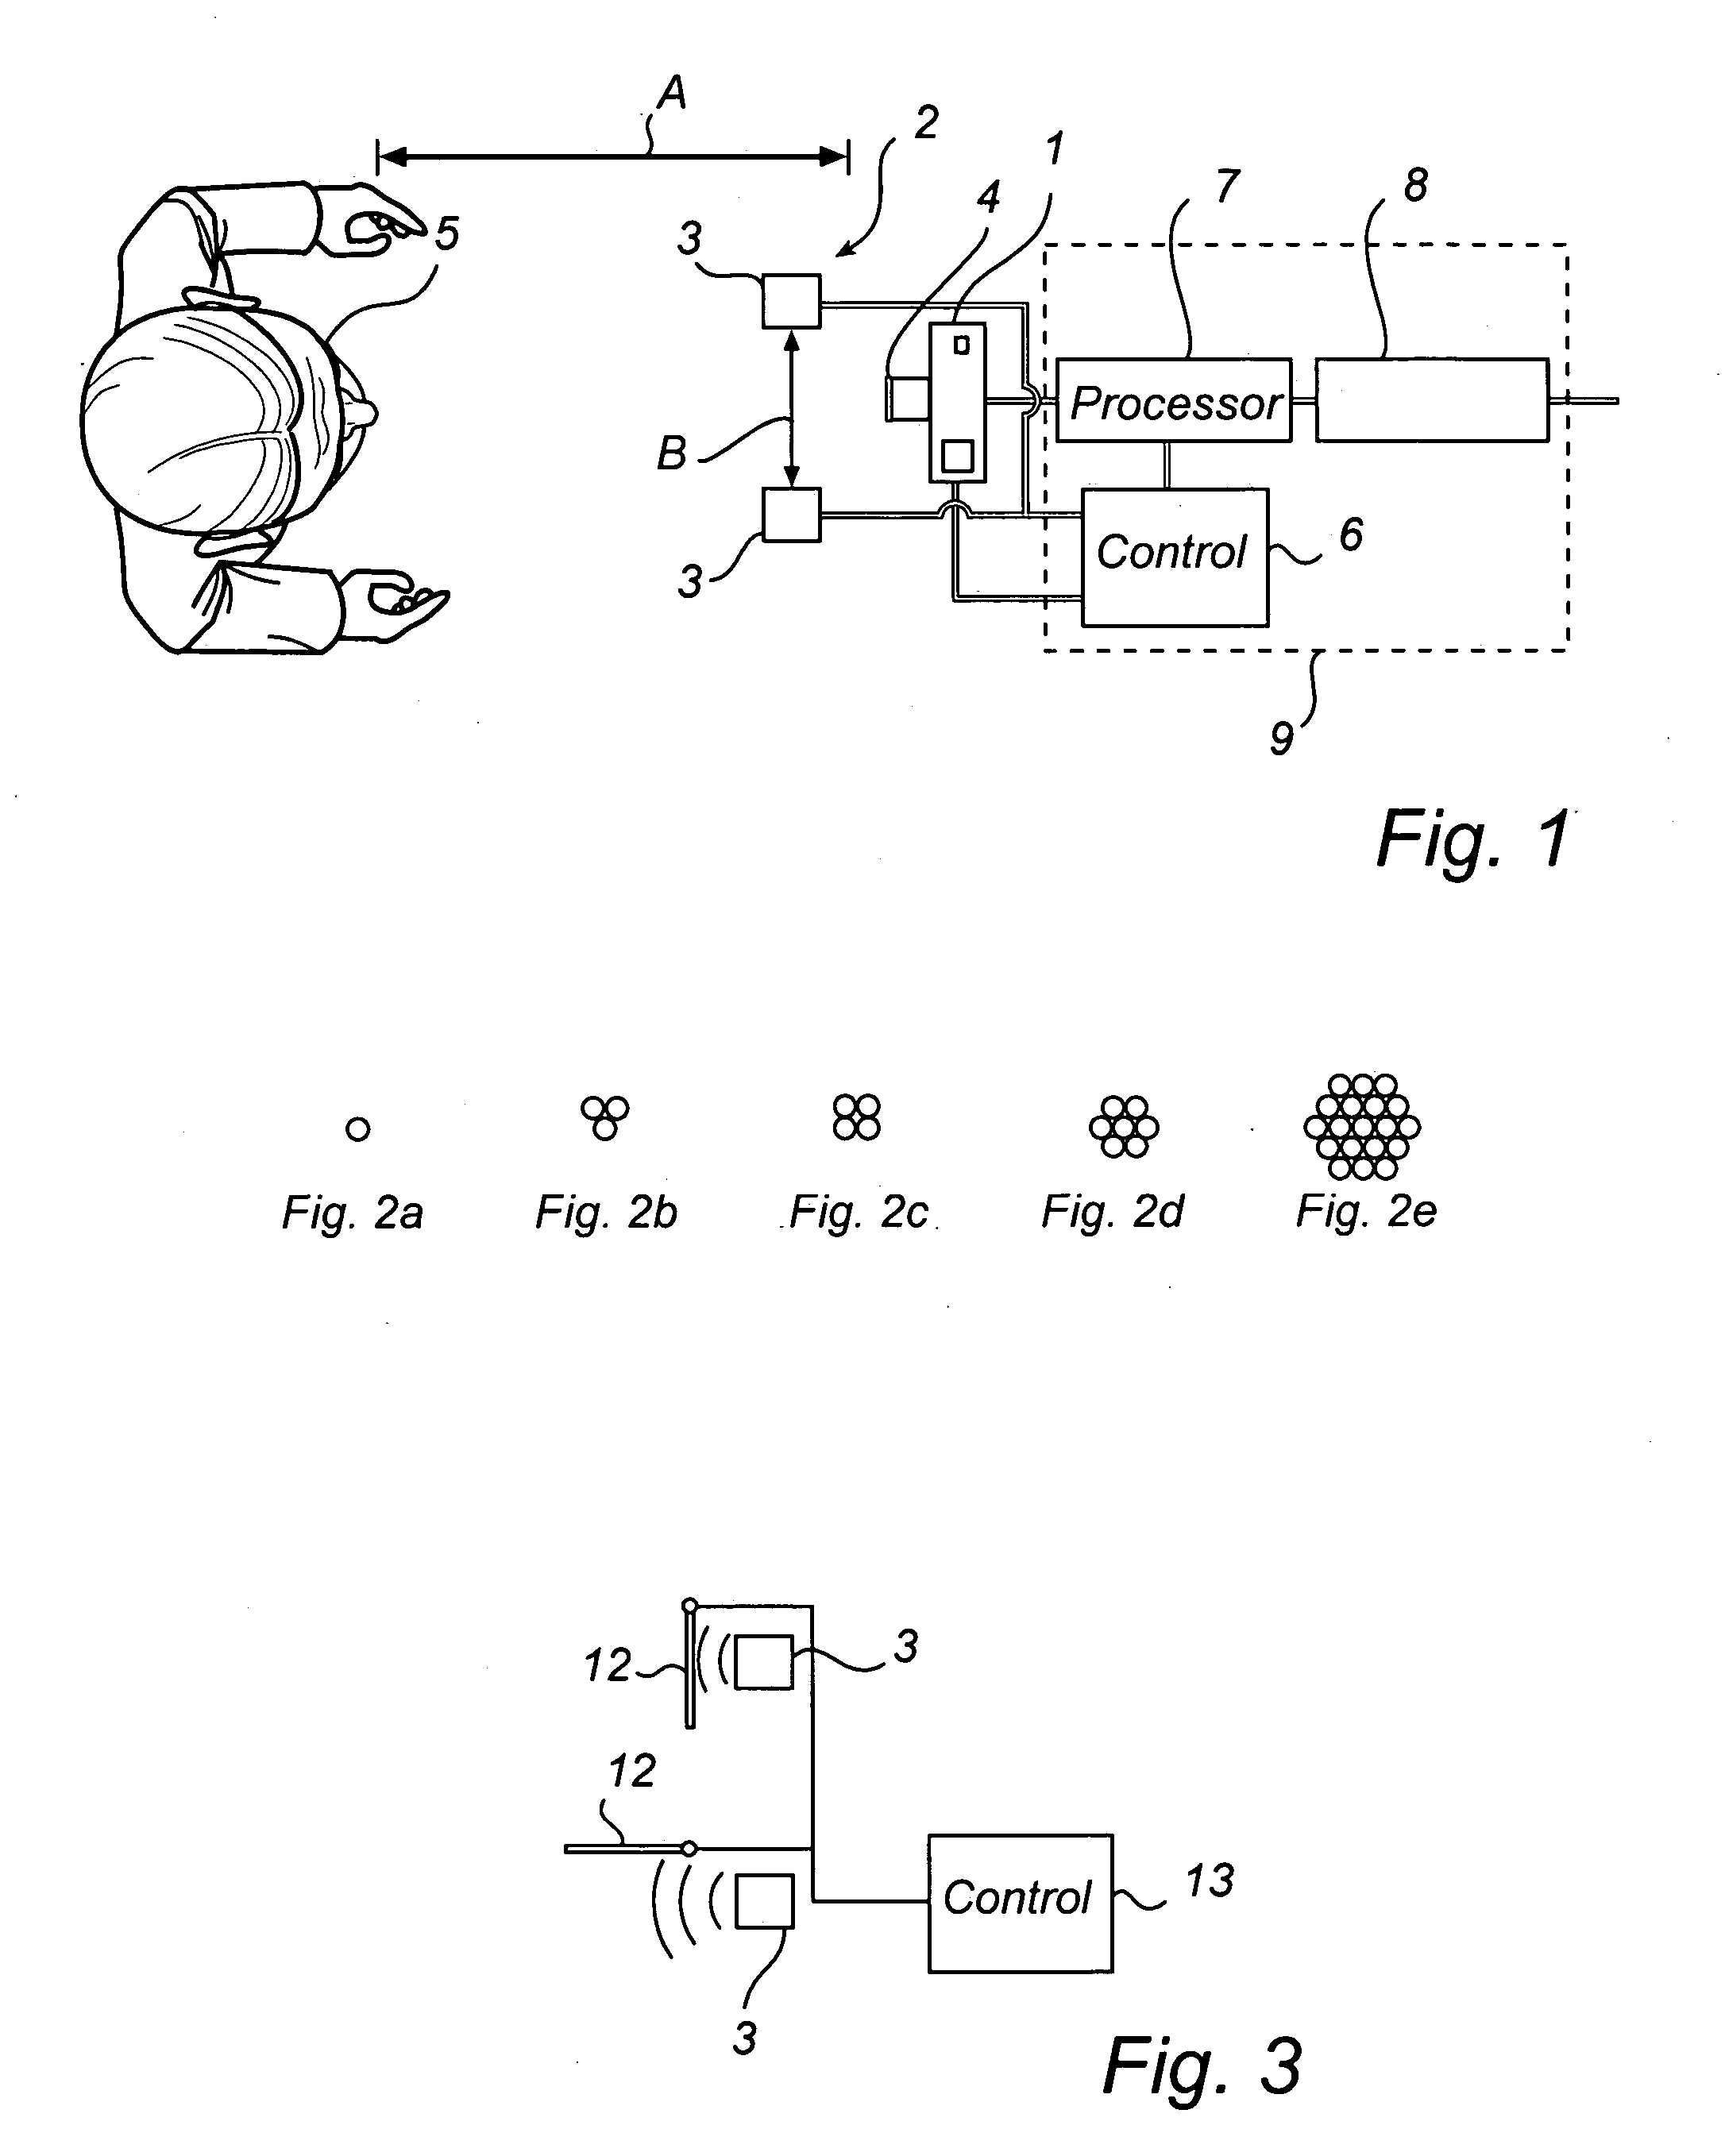 Image capturing device with reflex reduction